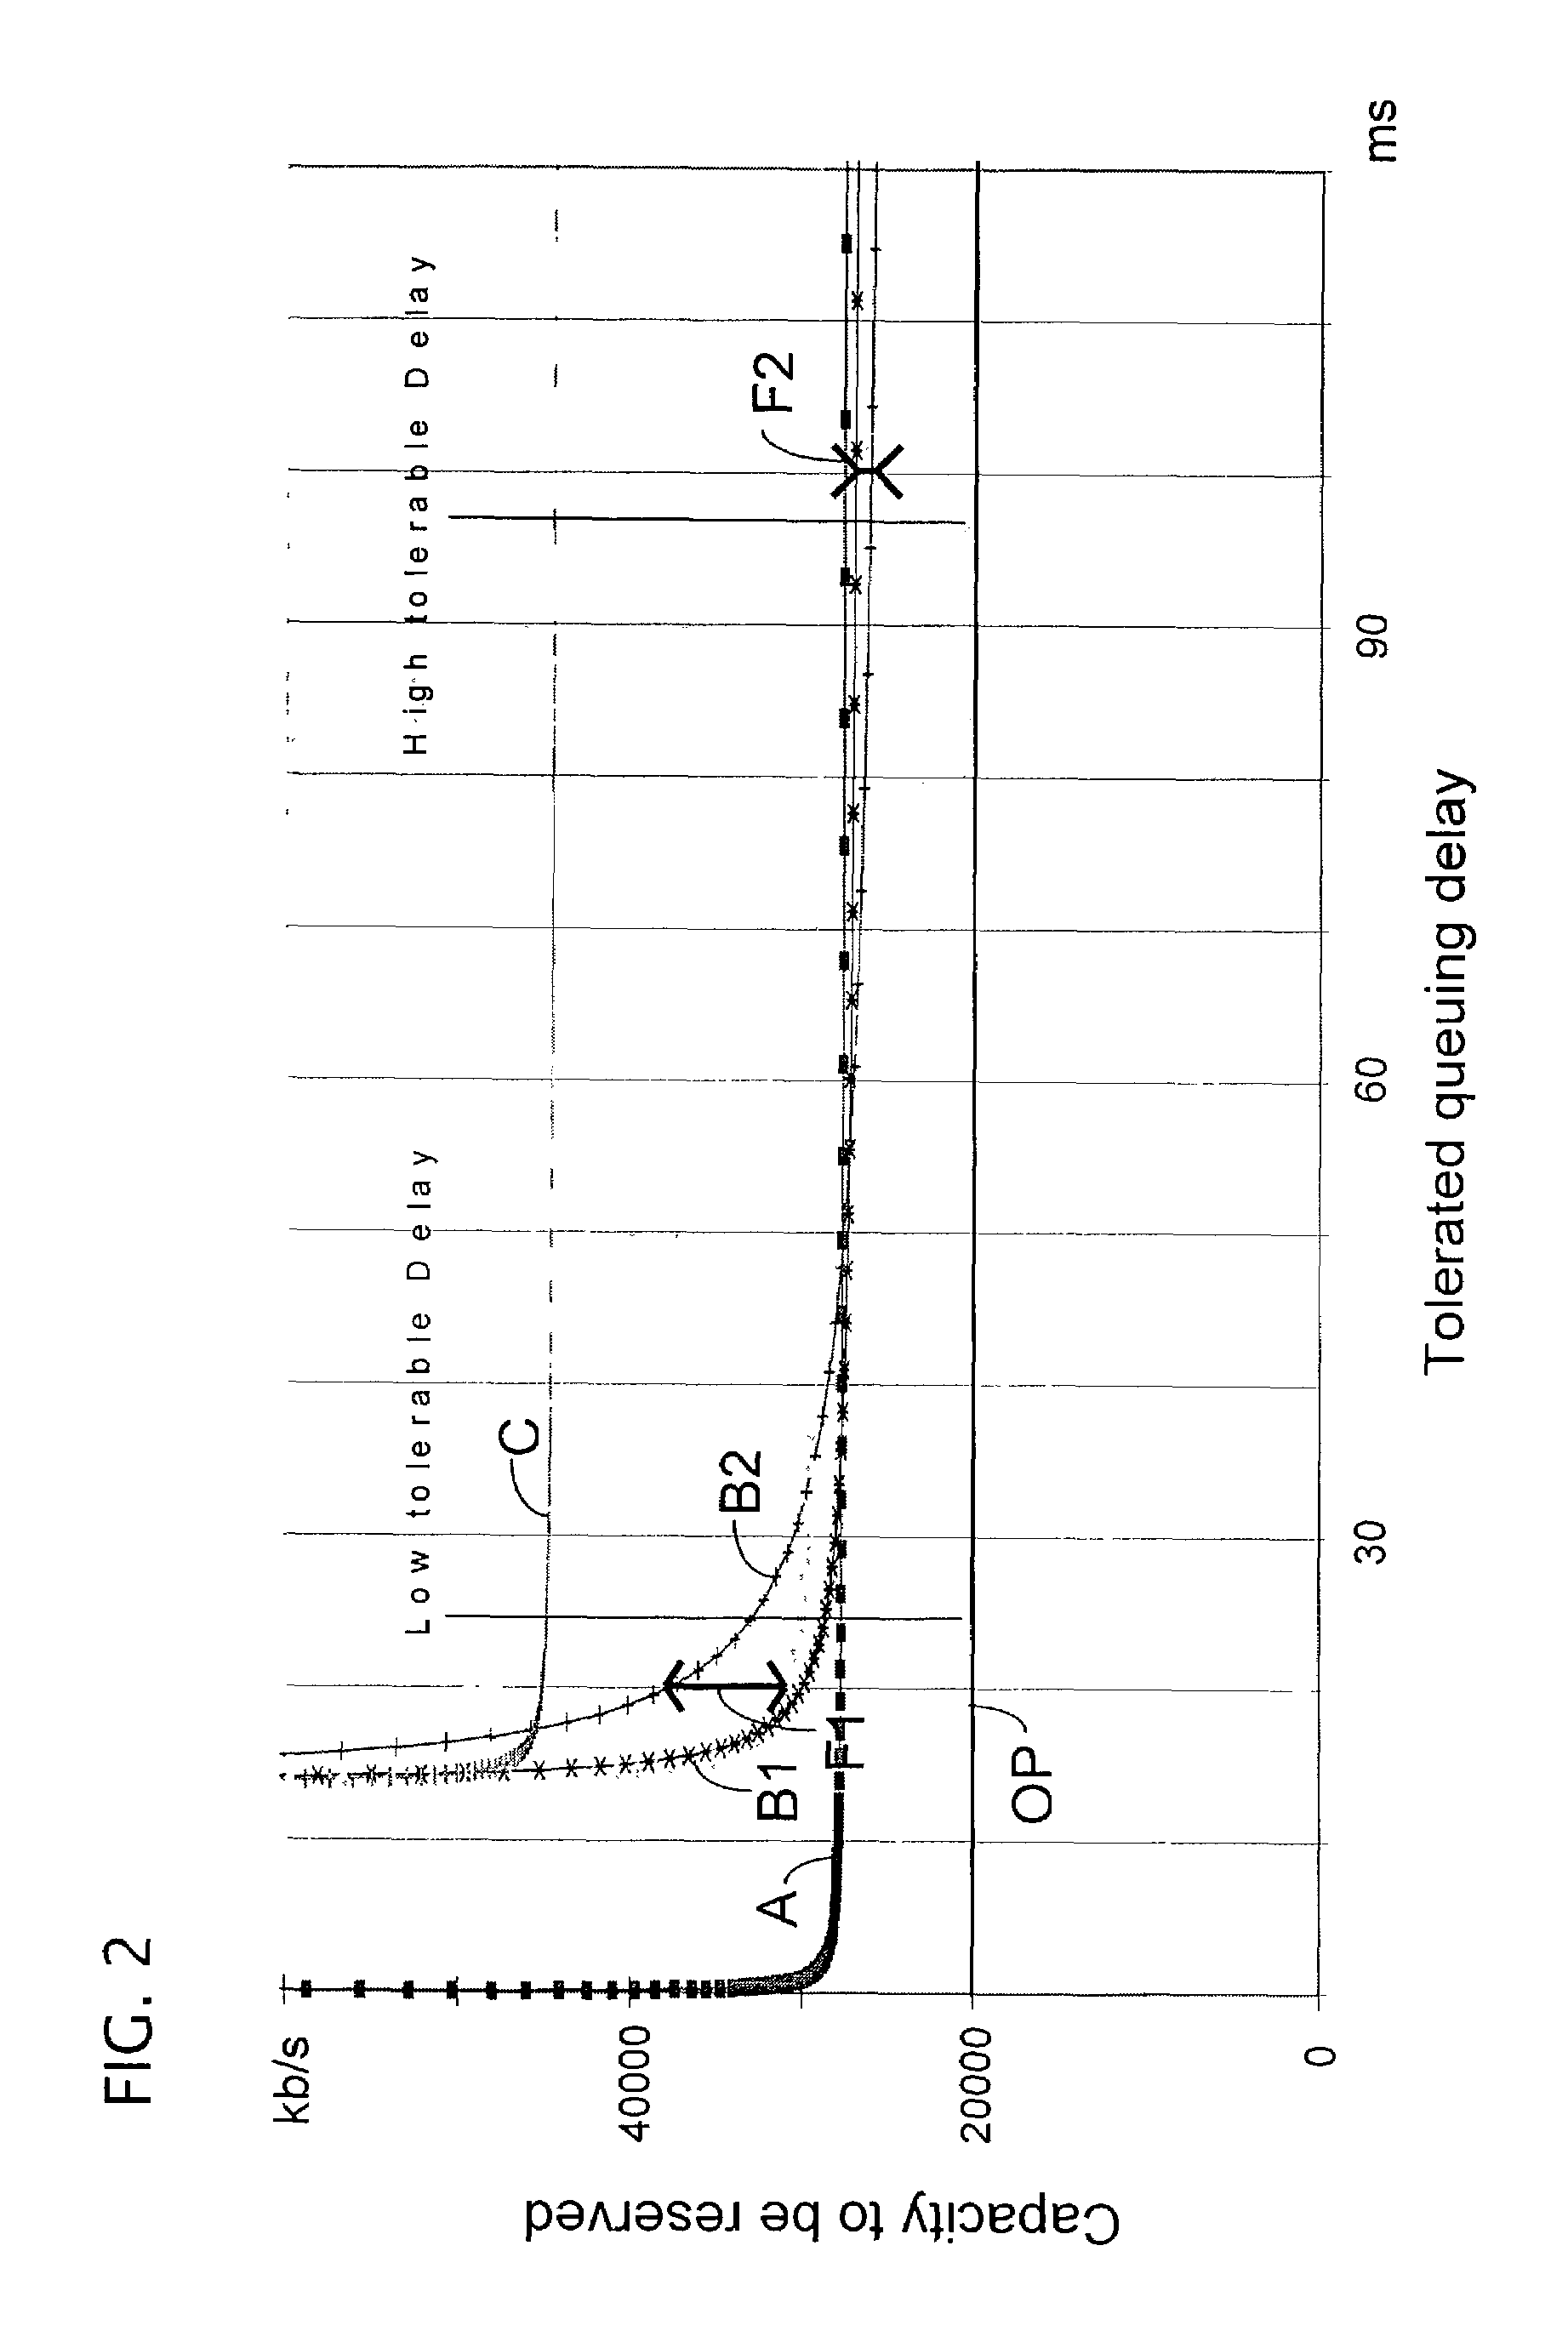 Method for optimizing the use of network resources for the transmission of data signals, such as voice, over an IP-packet supporting network